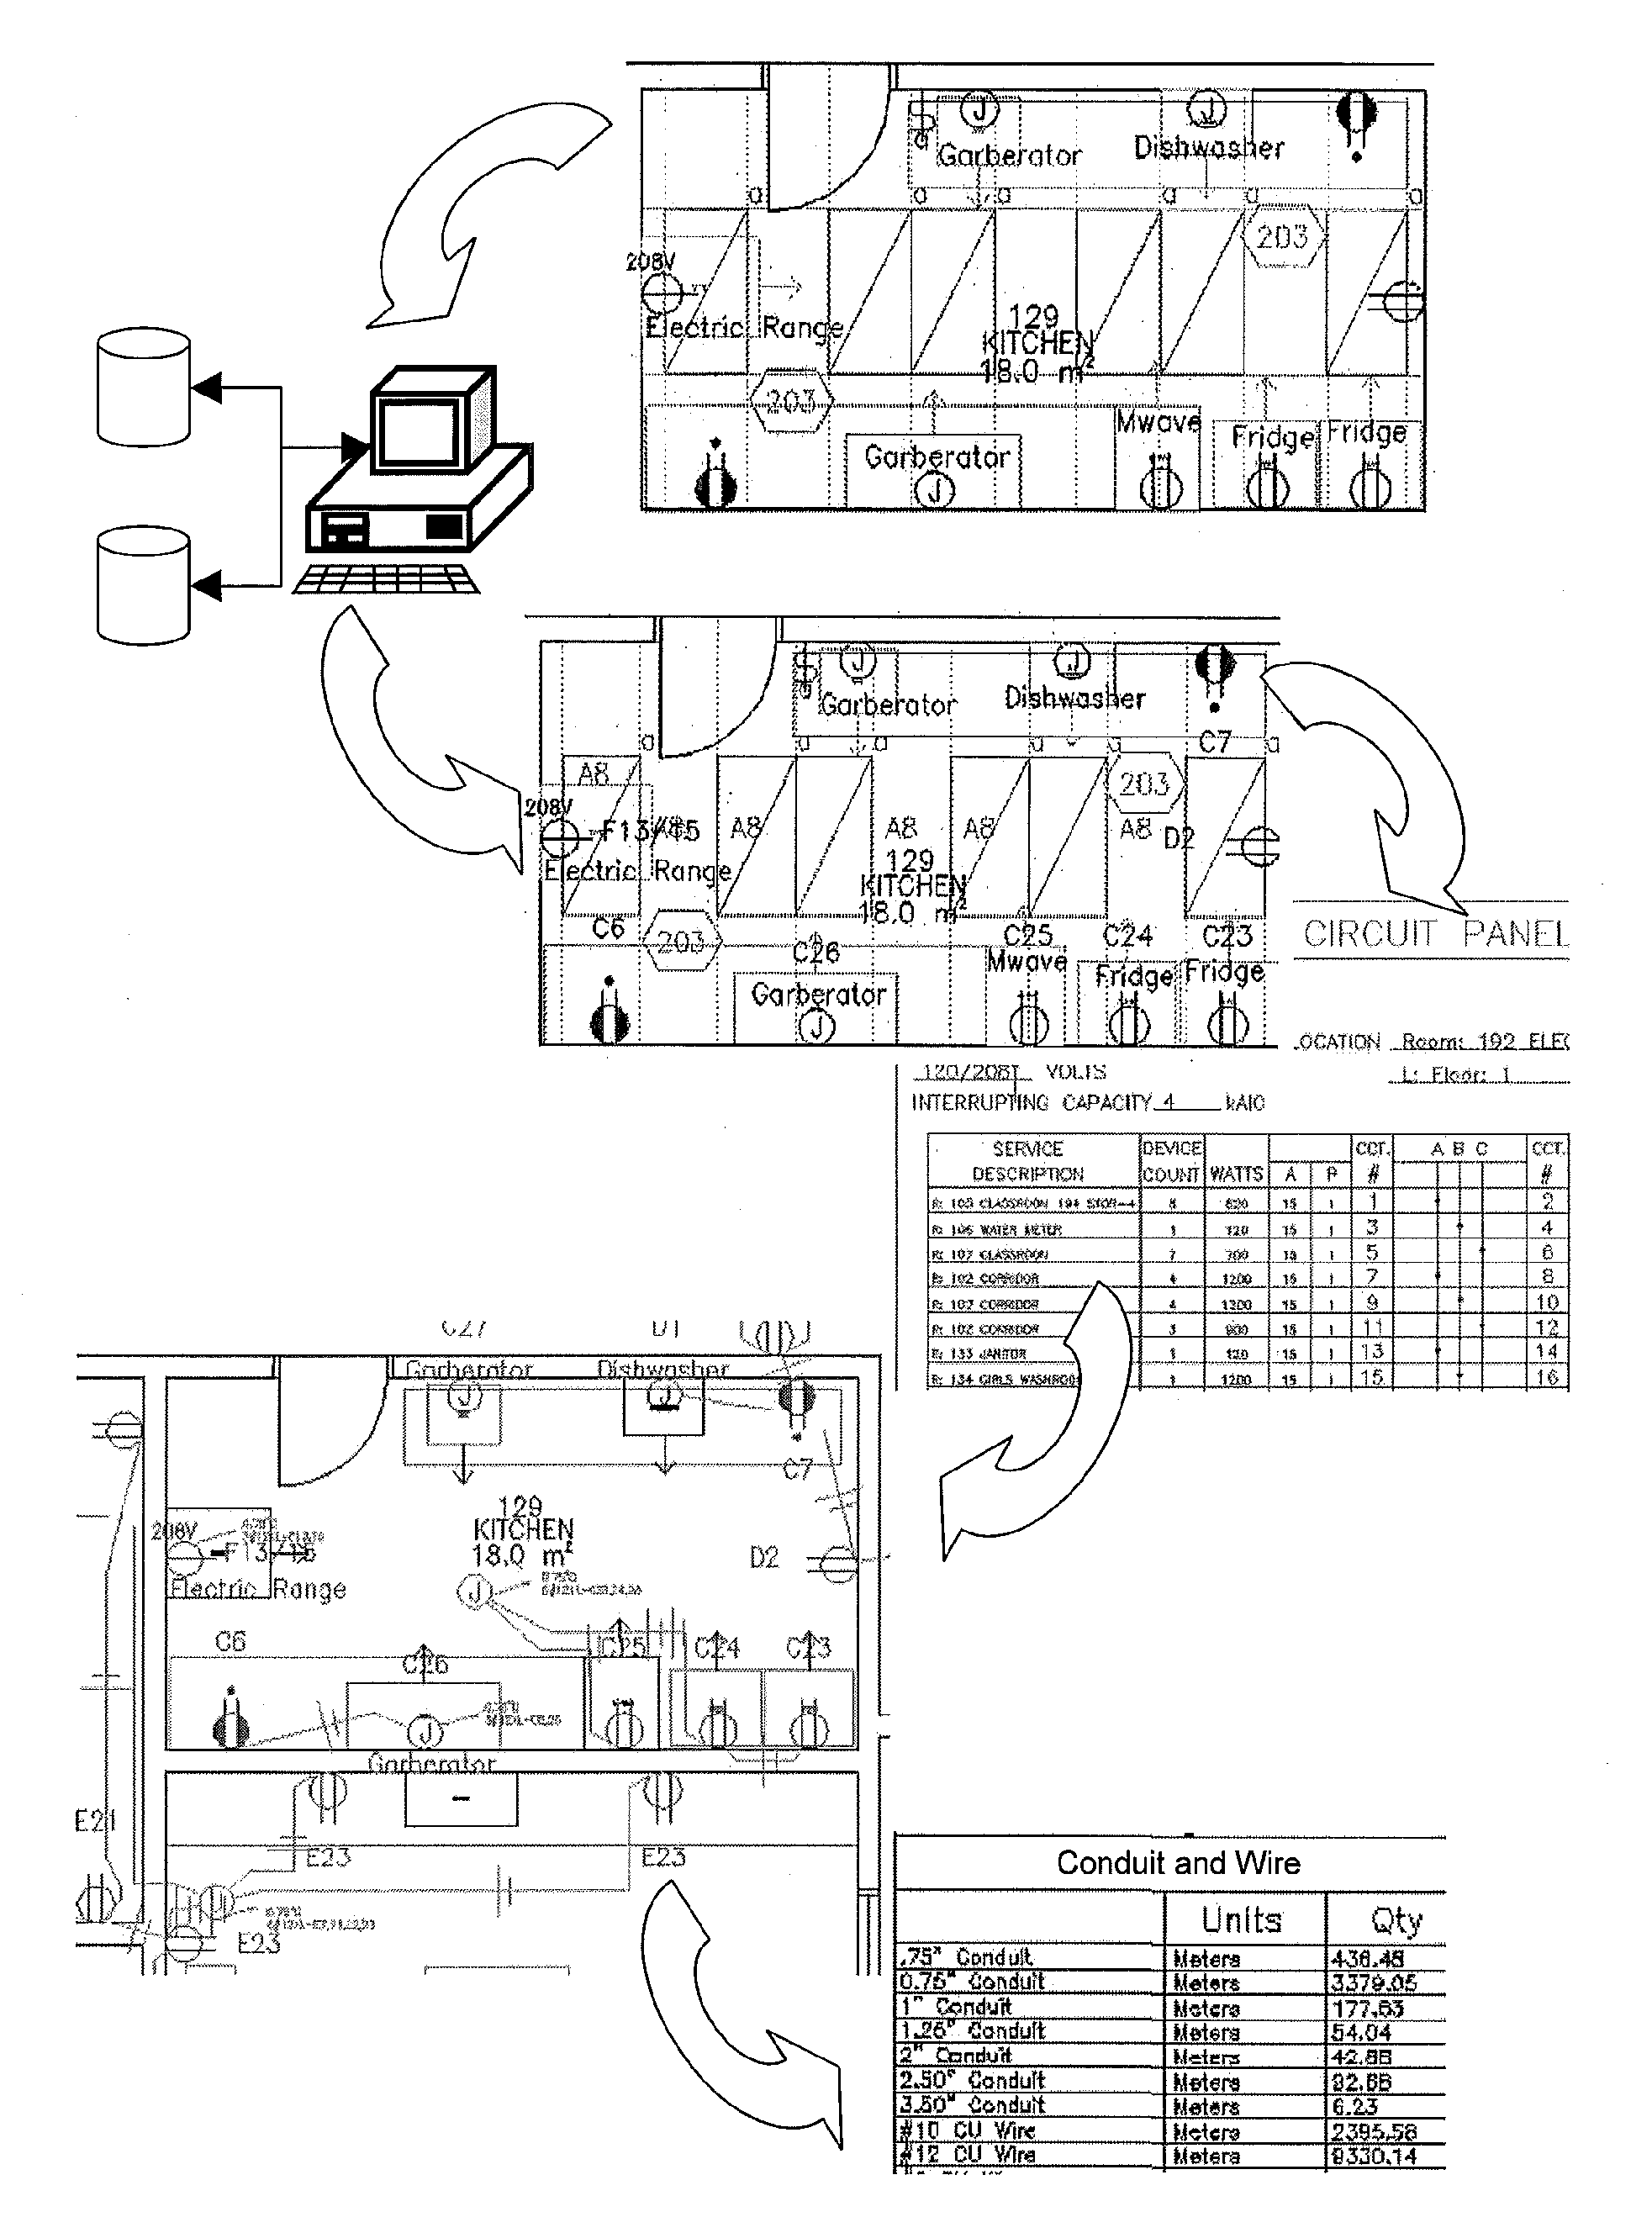 System and process for client driven automated circuiting and branch circuit wiring